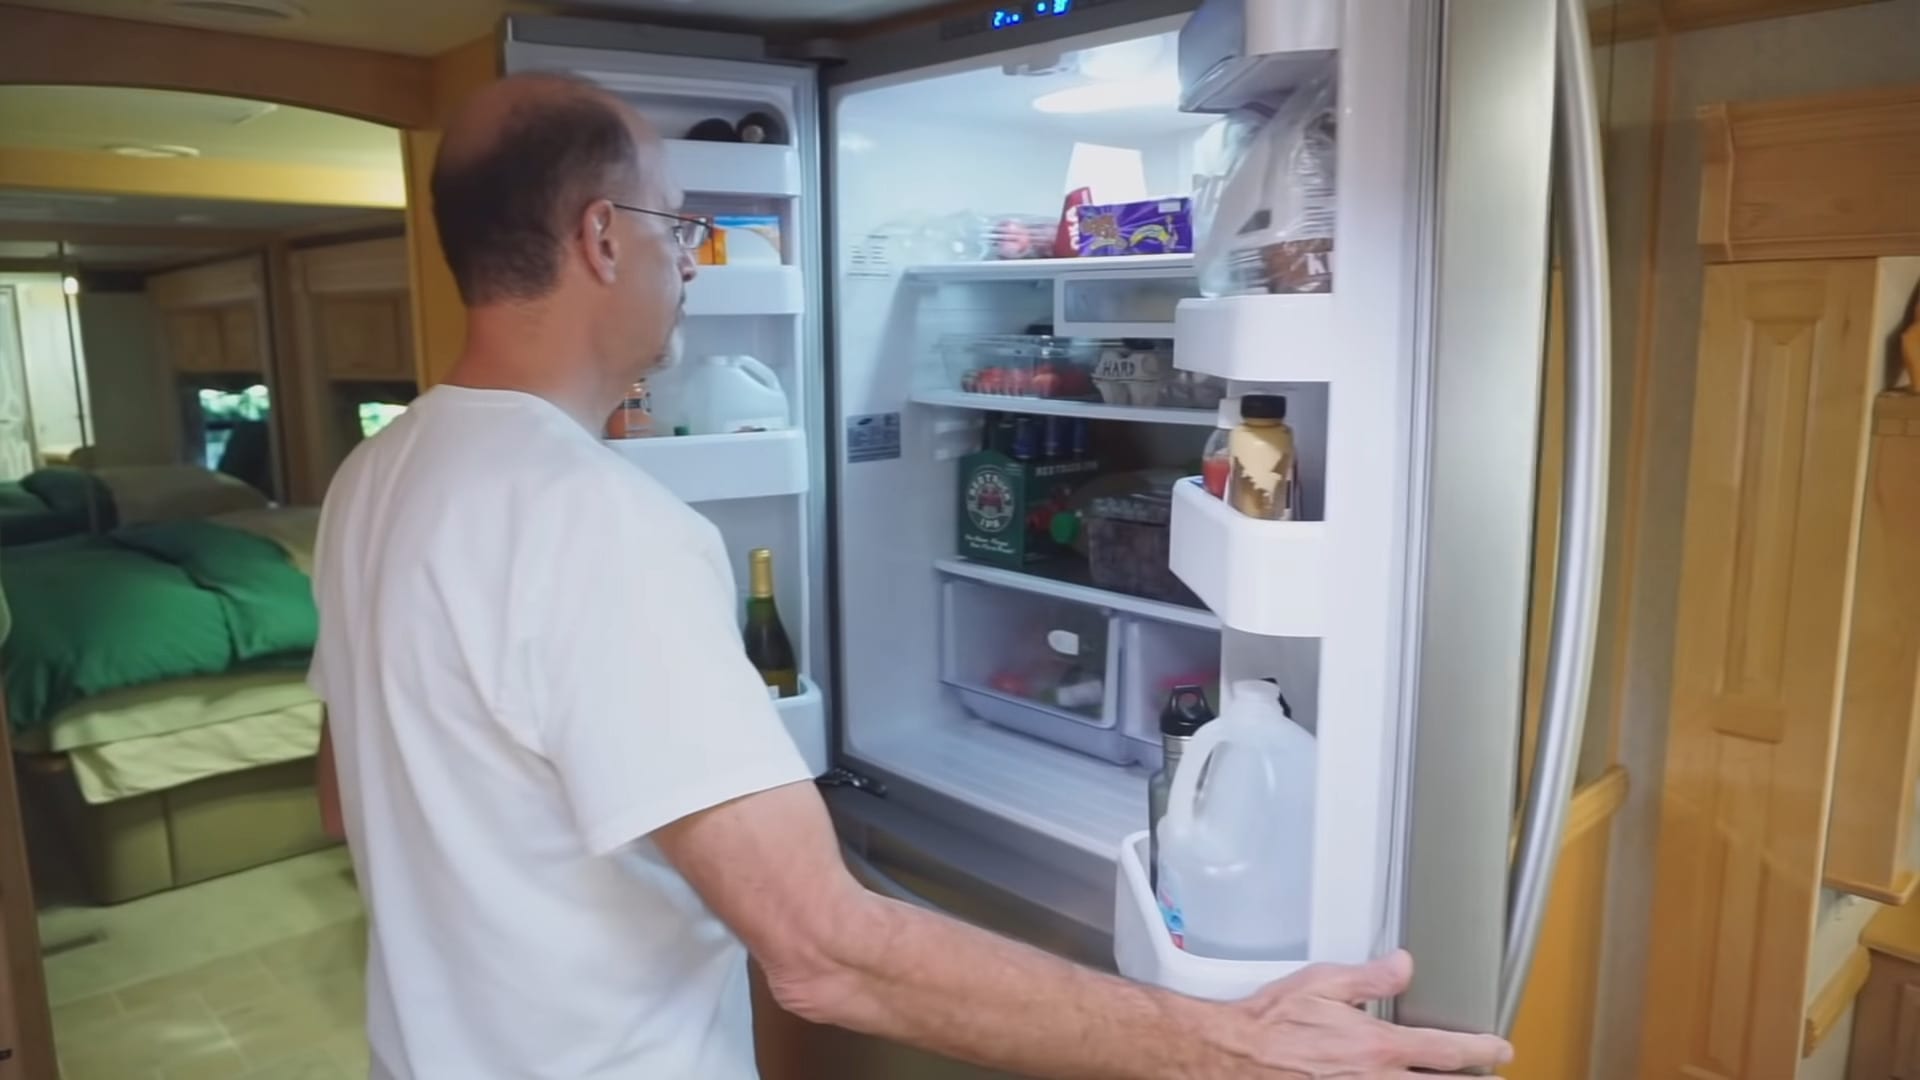 A large, fully stocked fridge and freezer are important to our lifestyle.